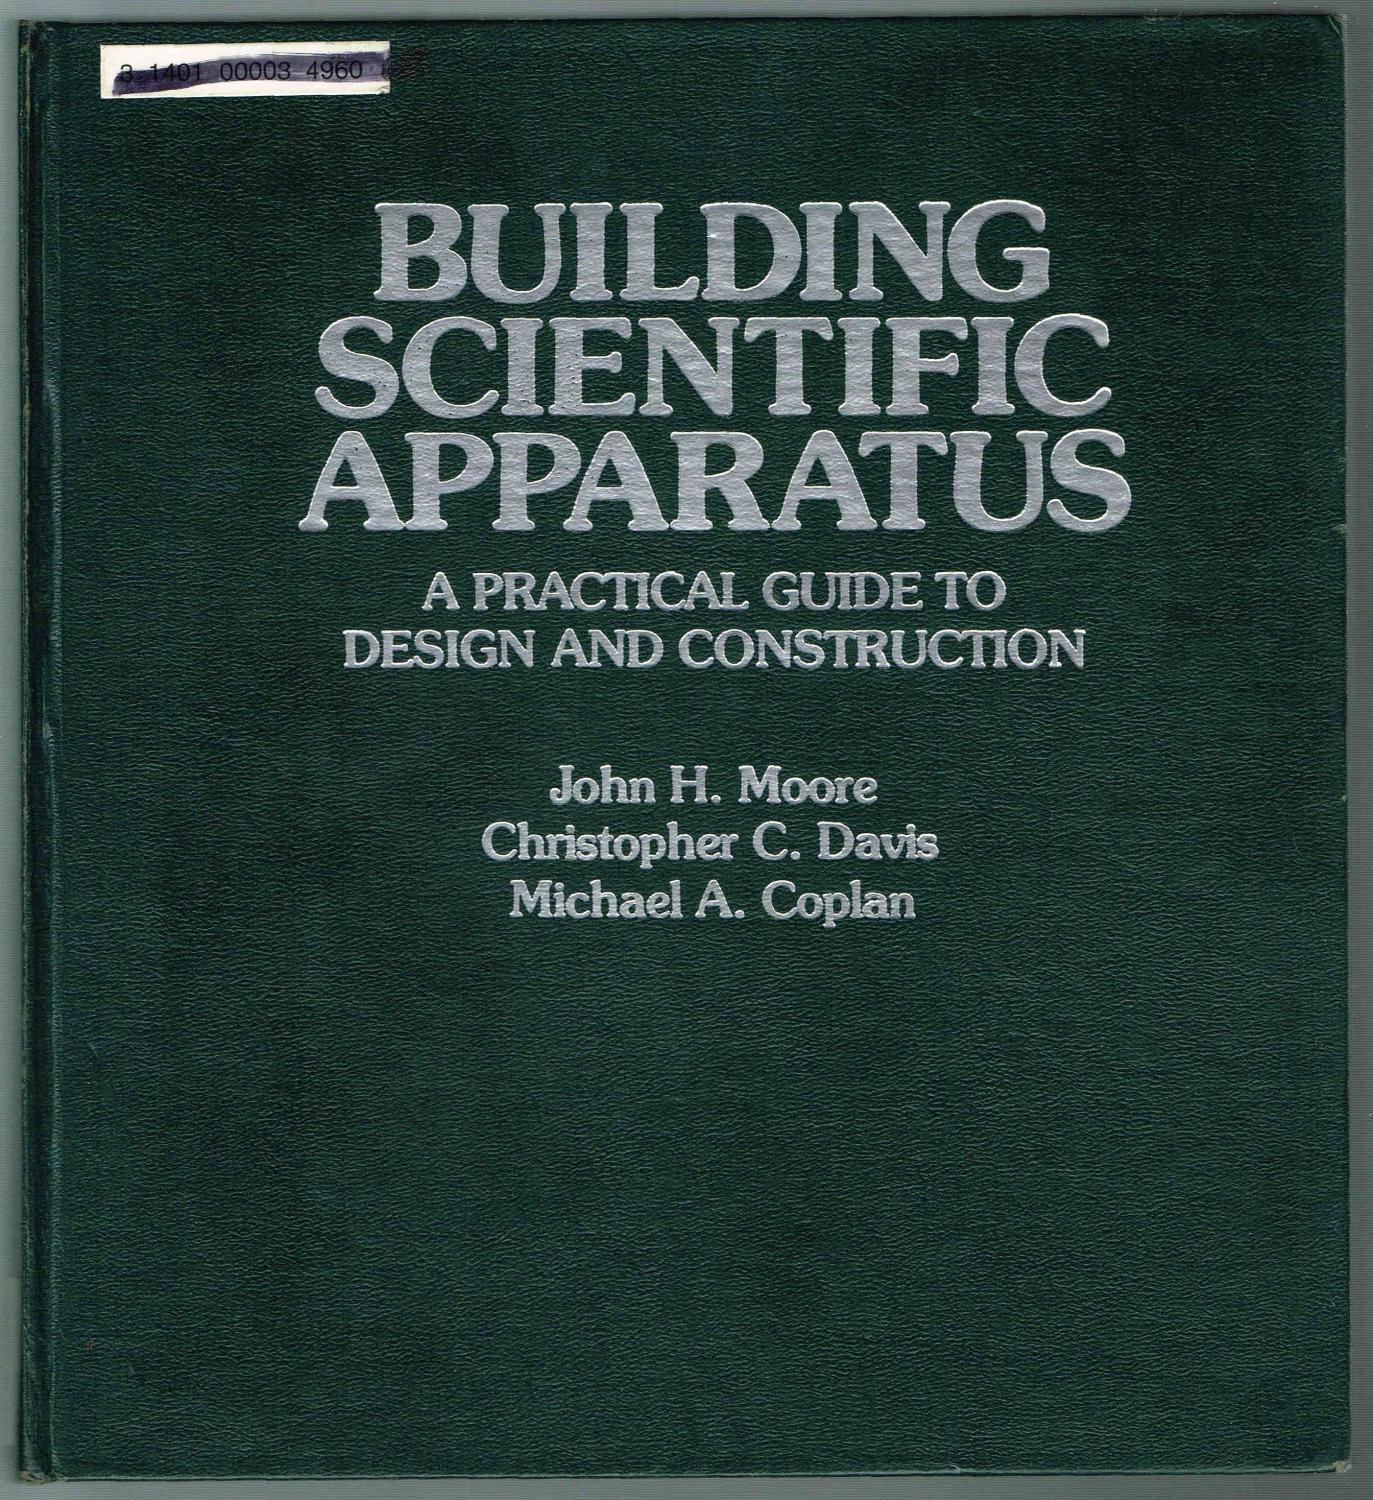 Building Scientific Apparatus: A Practical Guide to Design and Construction